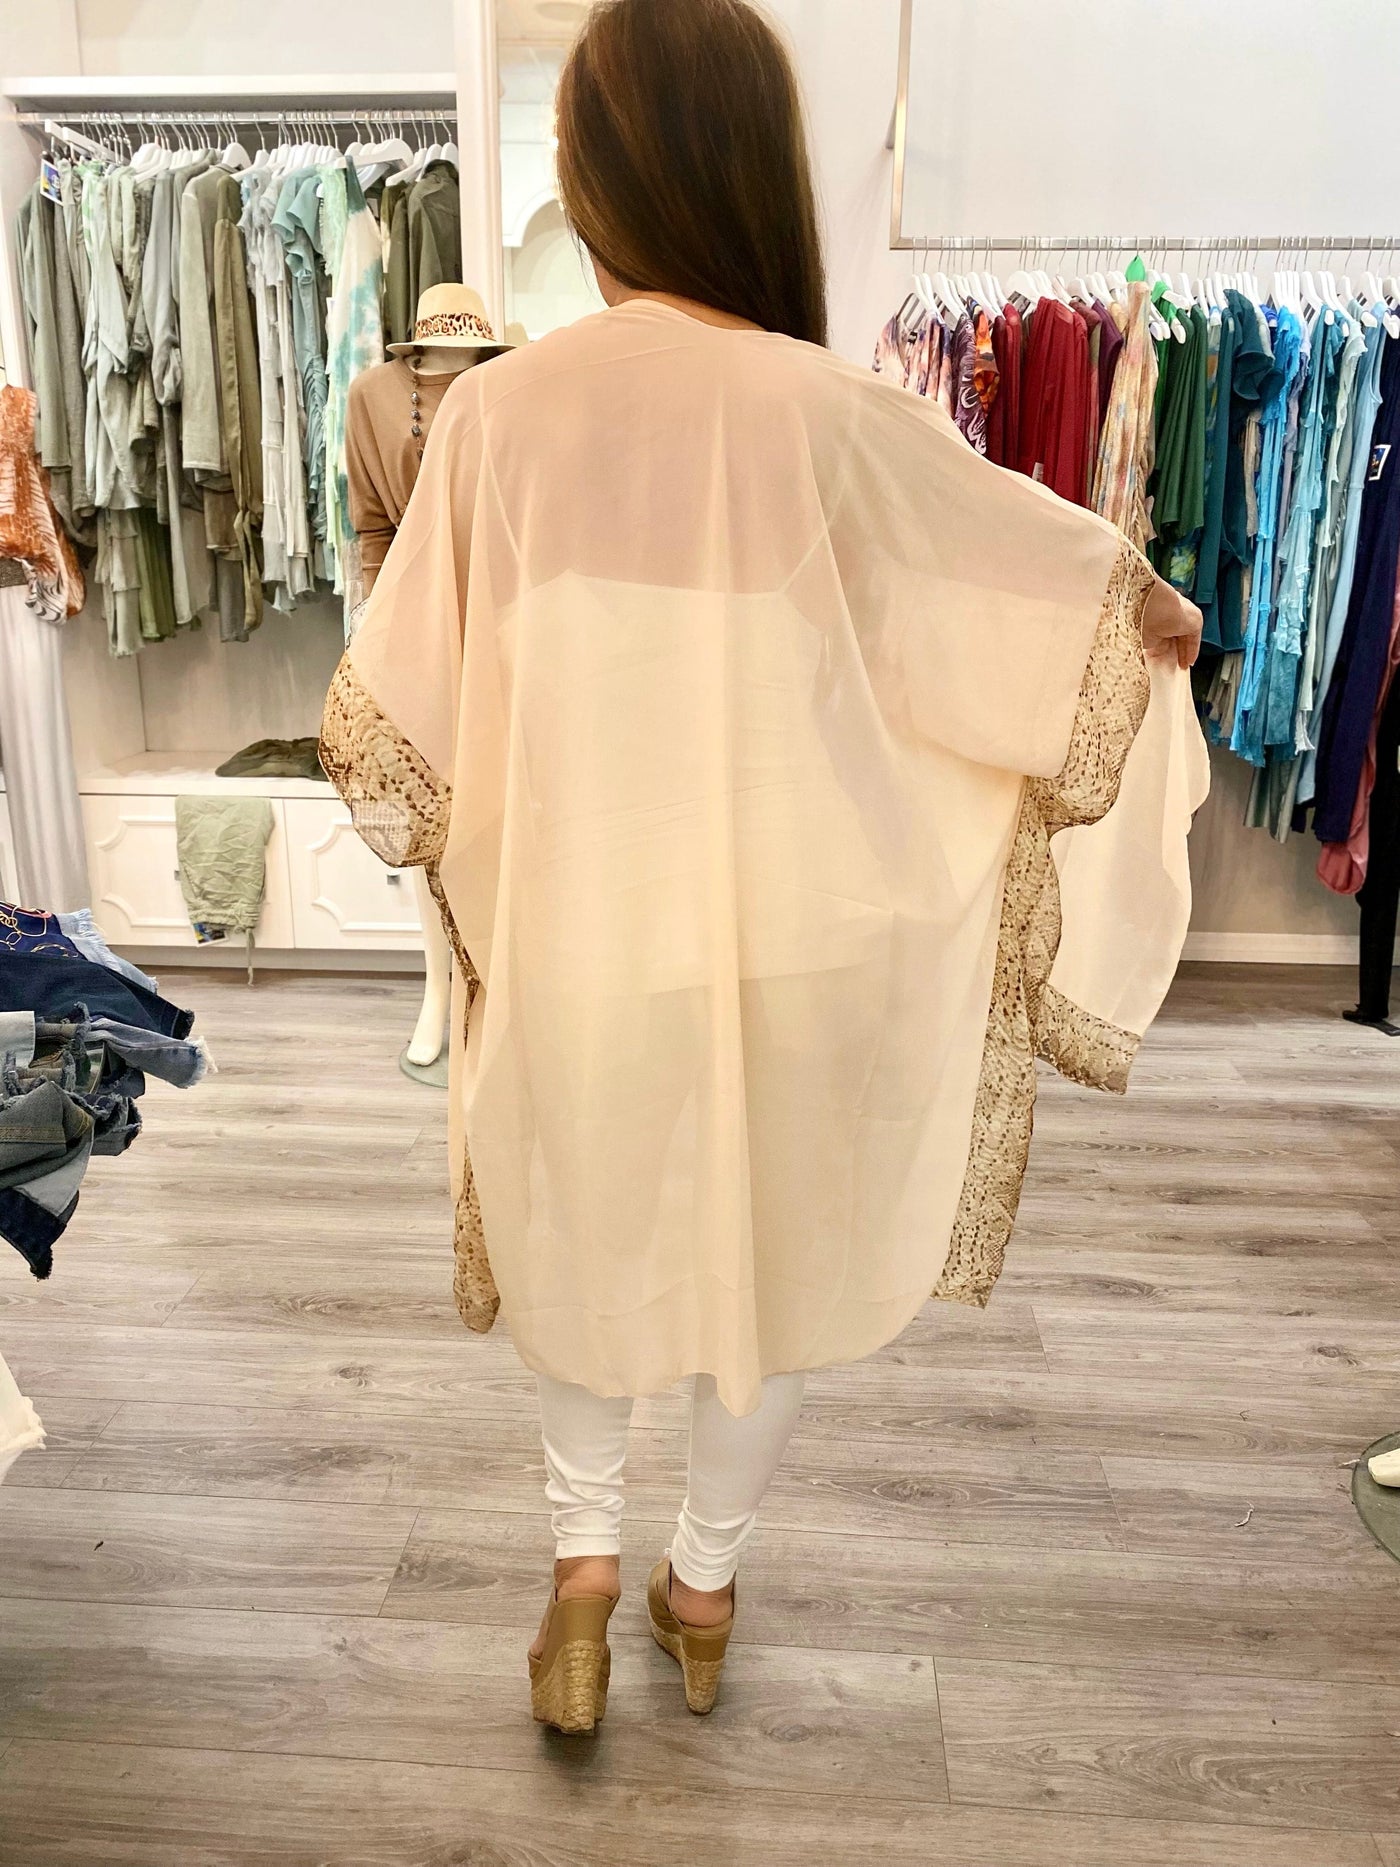 Back view of cream colored kimono with snakeskin accents